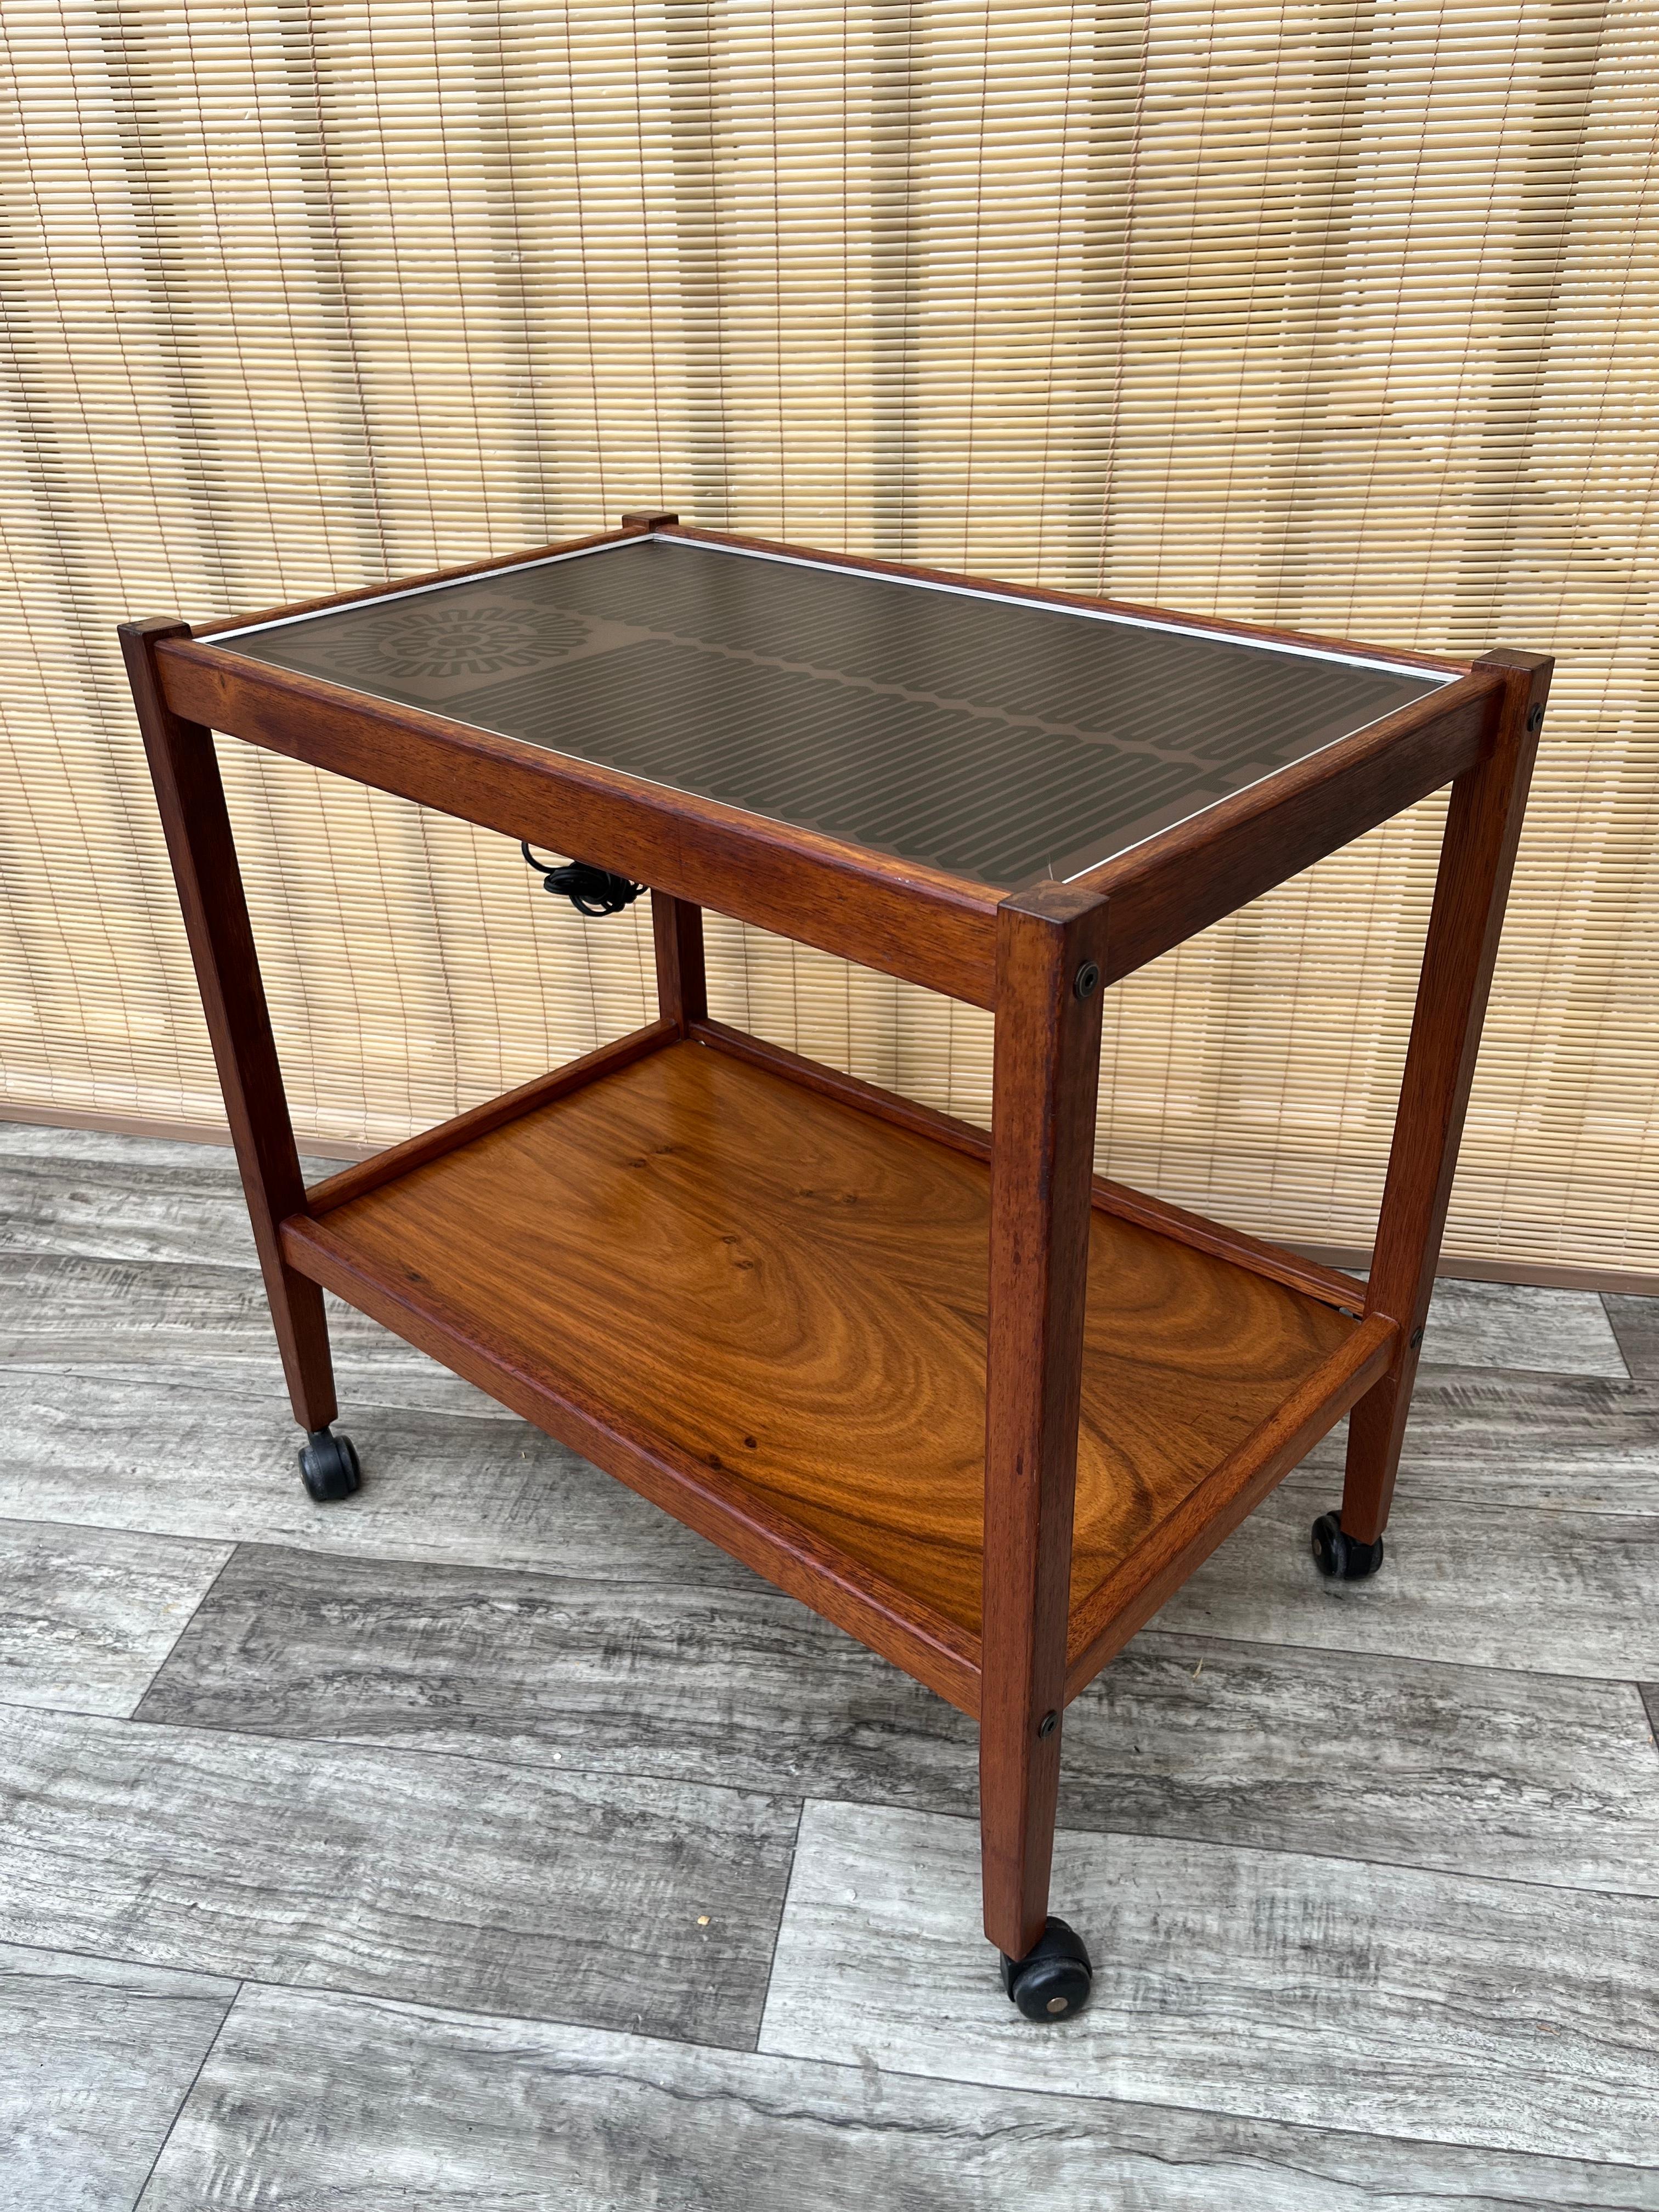 Vintage Mid-Century Modern Two-Tier Hot Table Buffet Cart by Salton. Circa 1960s
Features a solid wood frame in a Scandinavian Mid-Century Modern Inspired Design, a beautiful wood grain, with Casters and a top glass food warmer surface.
In